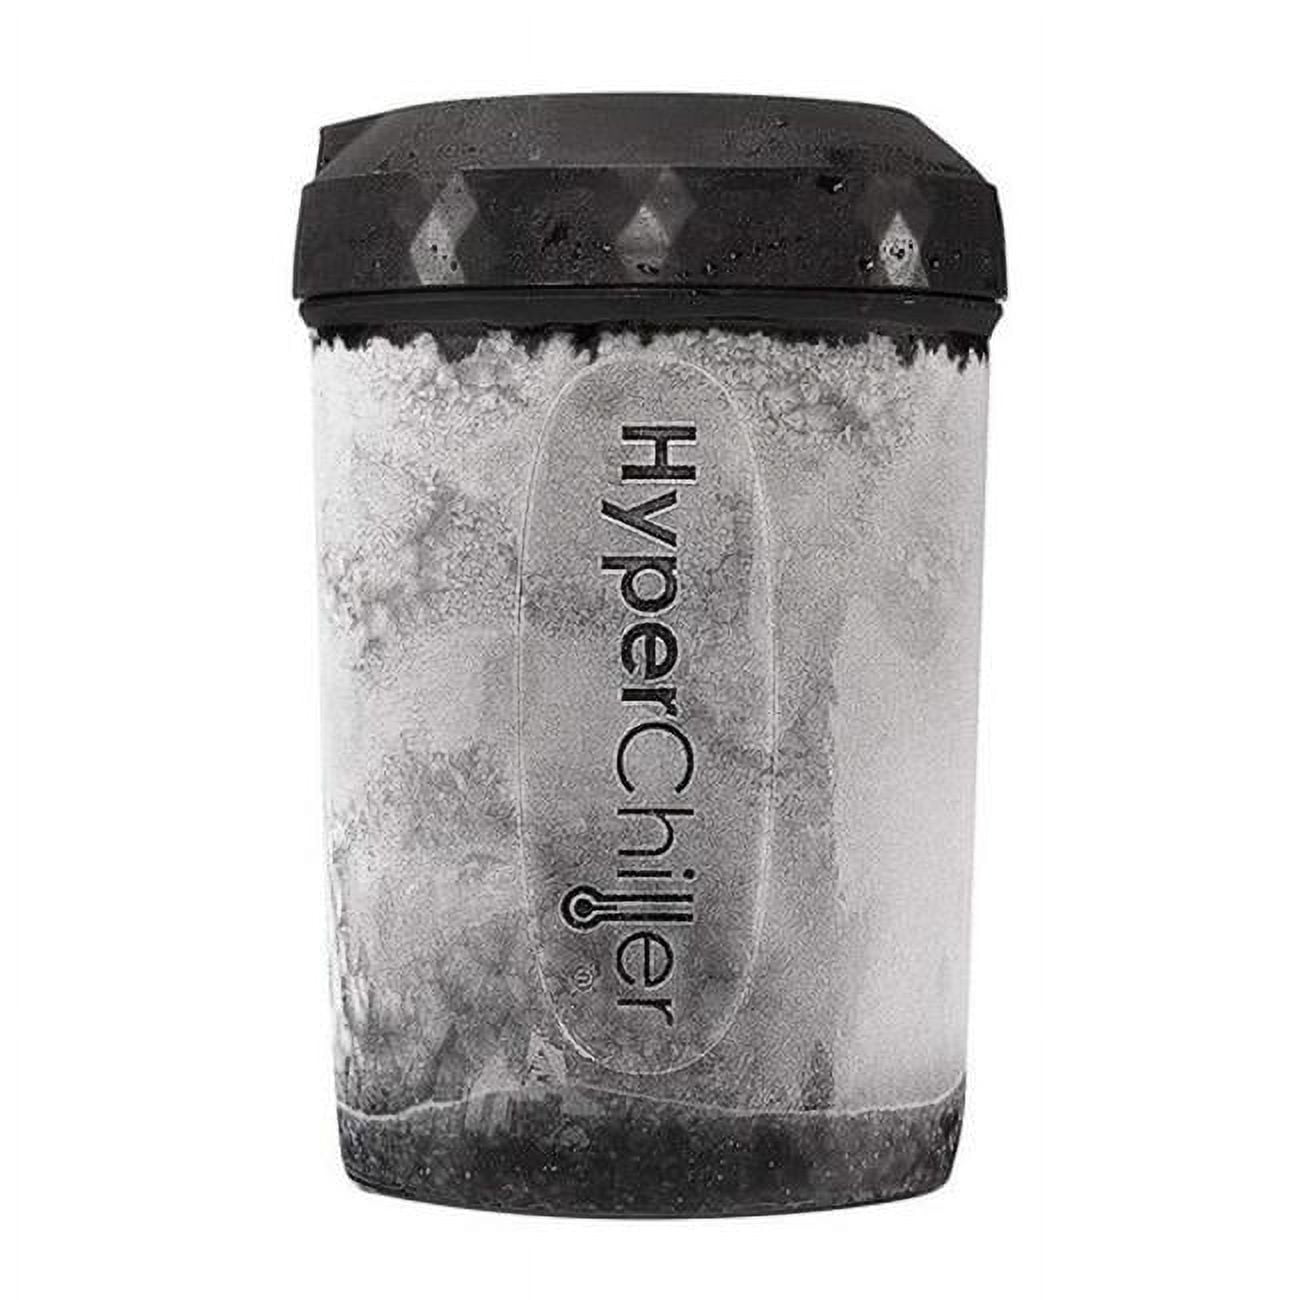 HyperChiller The Original but NEW Stainless-Steel HC2SS Patented Iced  Coffee/Beverage Cooler Ready in One Minute, Reusable for Iced Tea, Wine